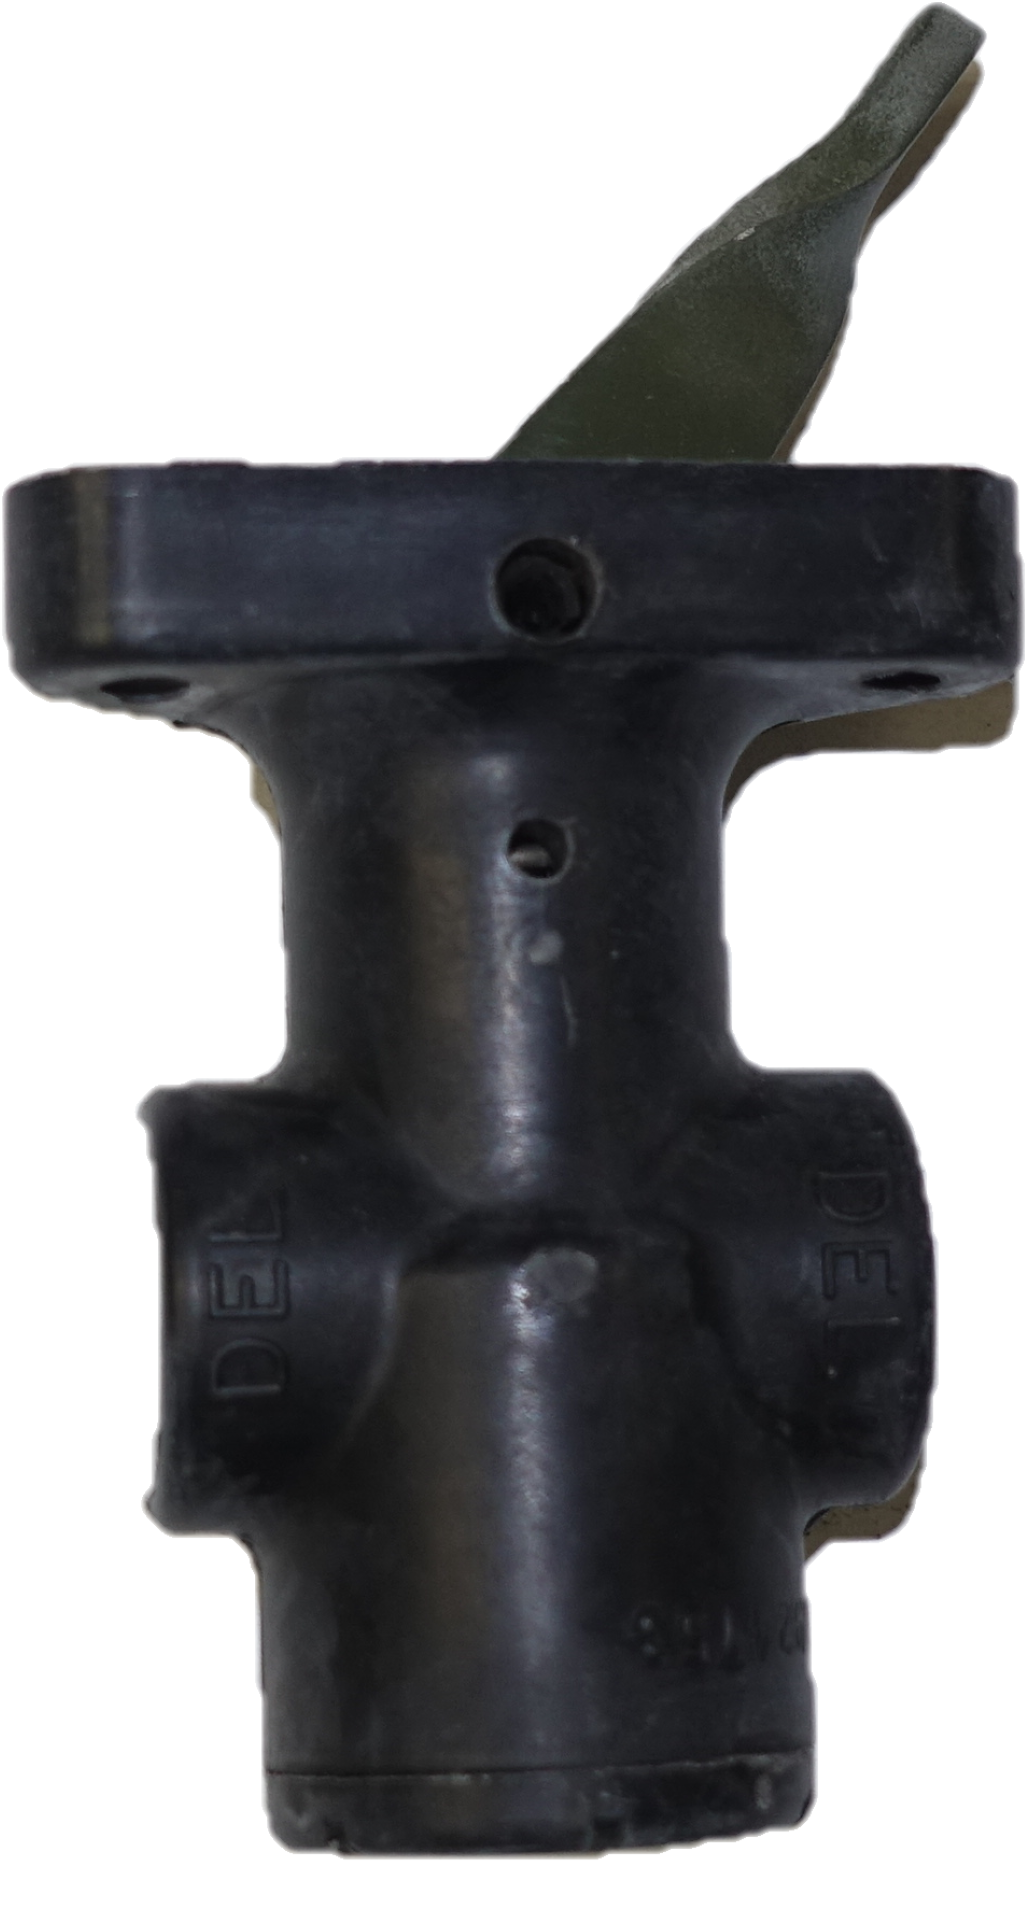 COM-3222 | COM-3222 Transfercase Air Actuating Switch (5) (Large).png